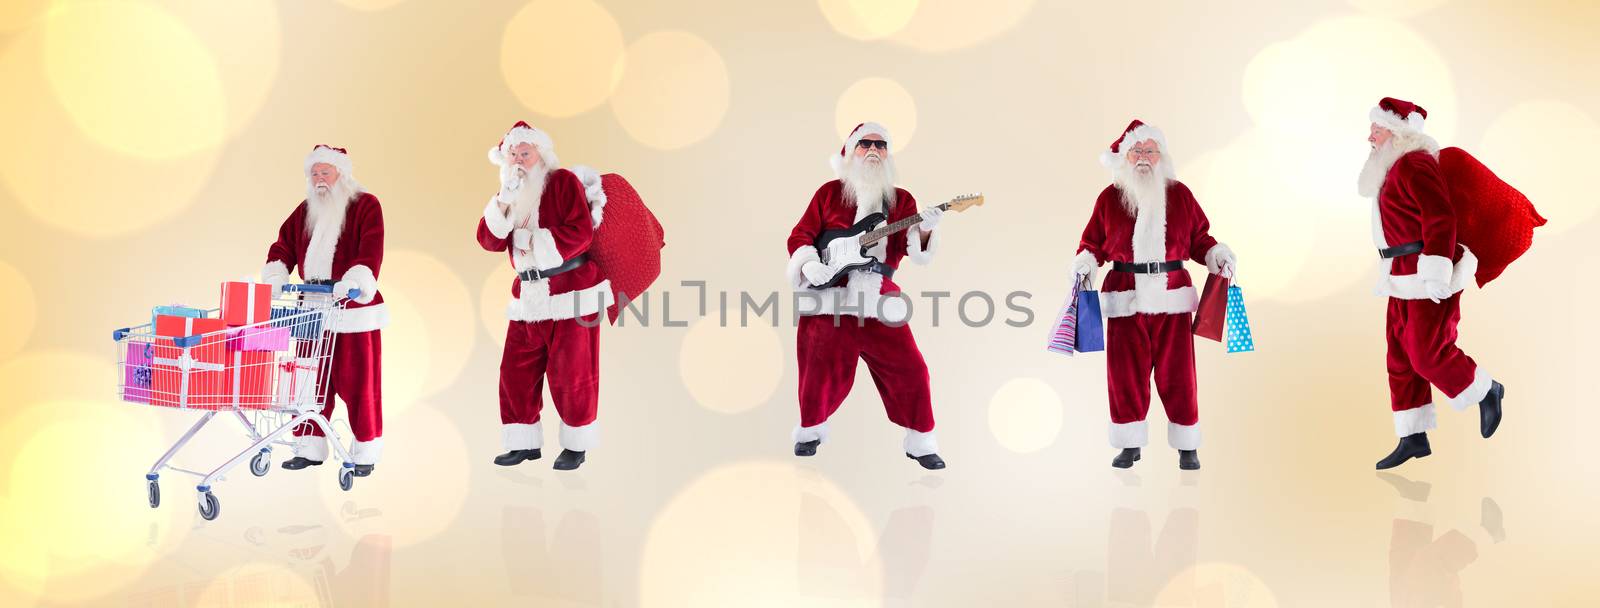 Composite image of different santas against yellow abstract light spot design